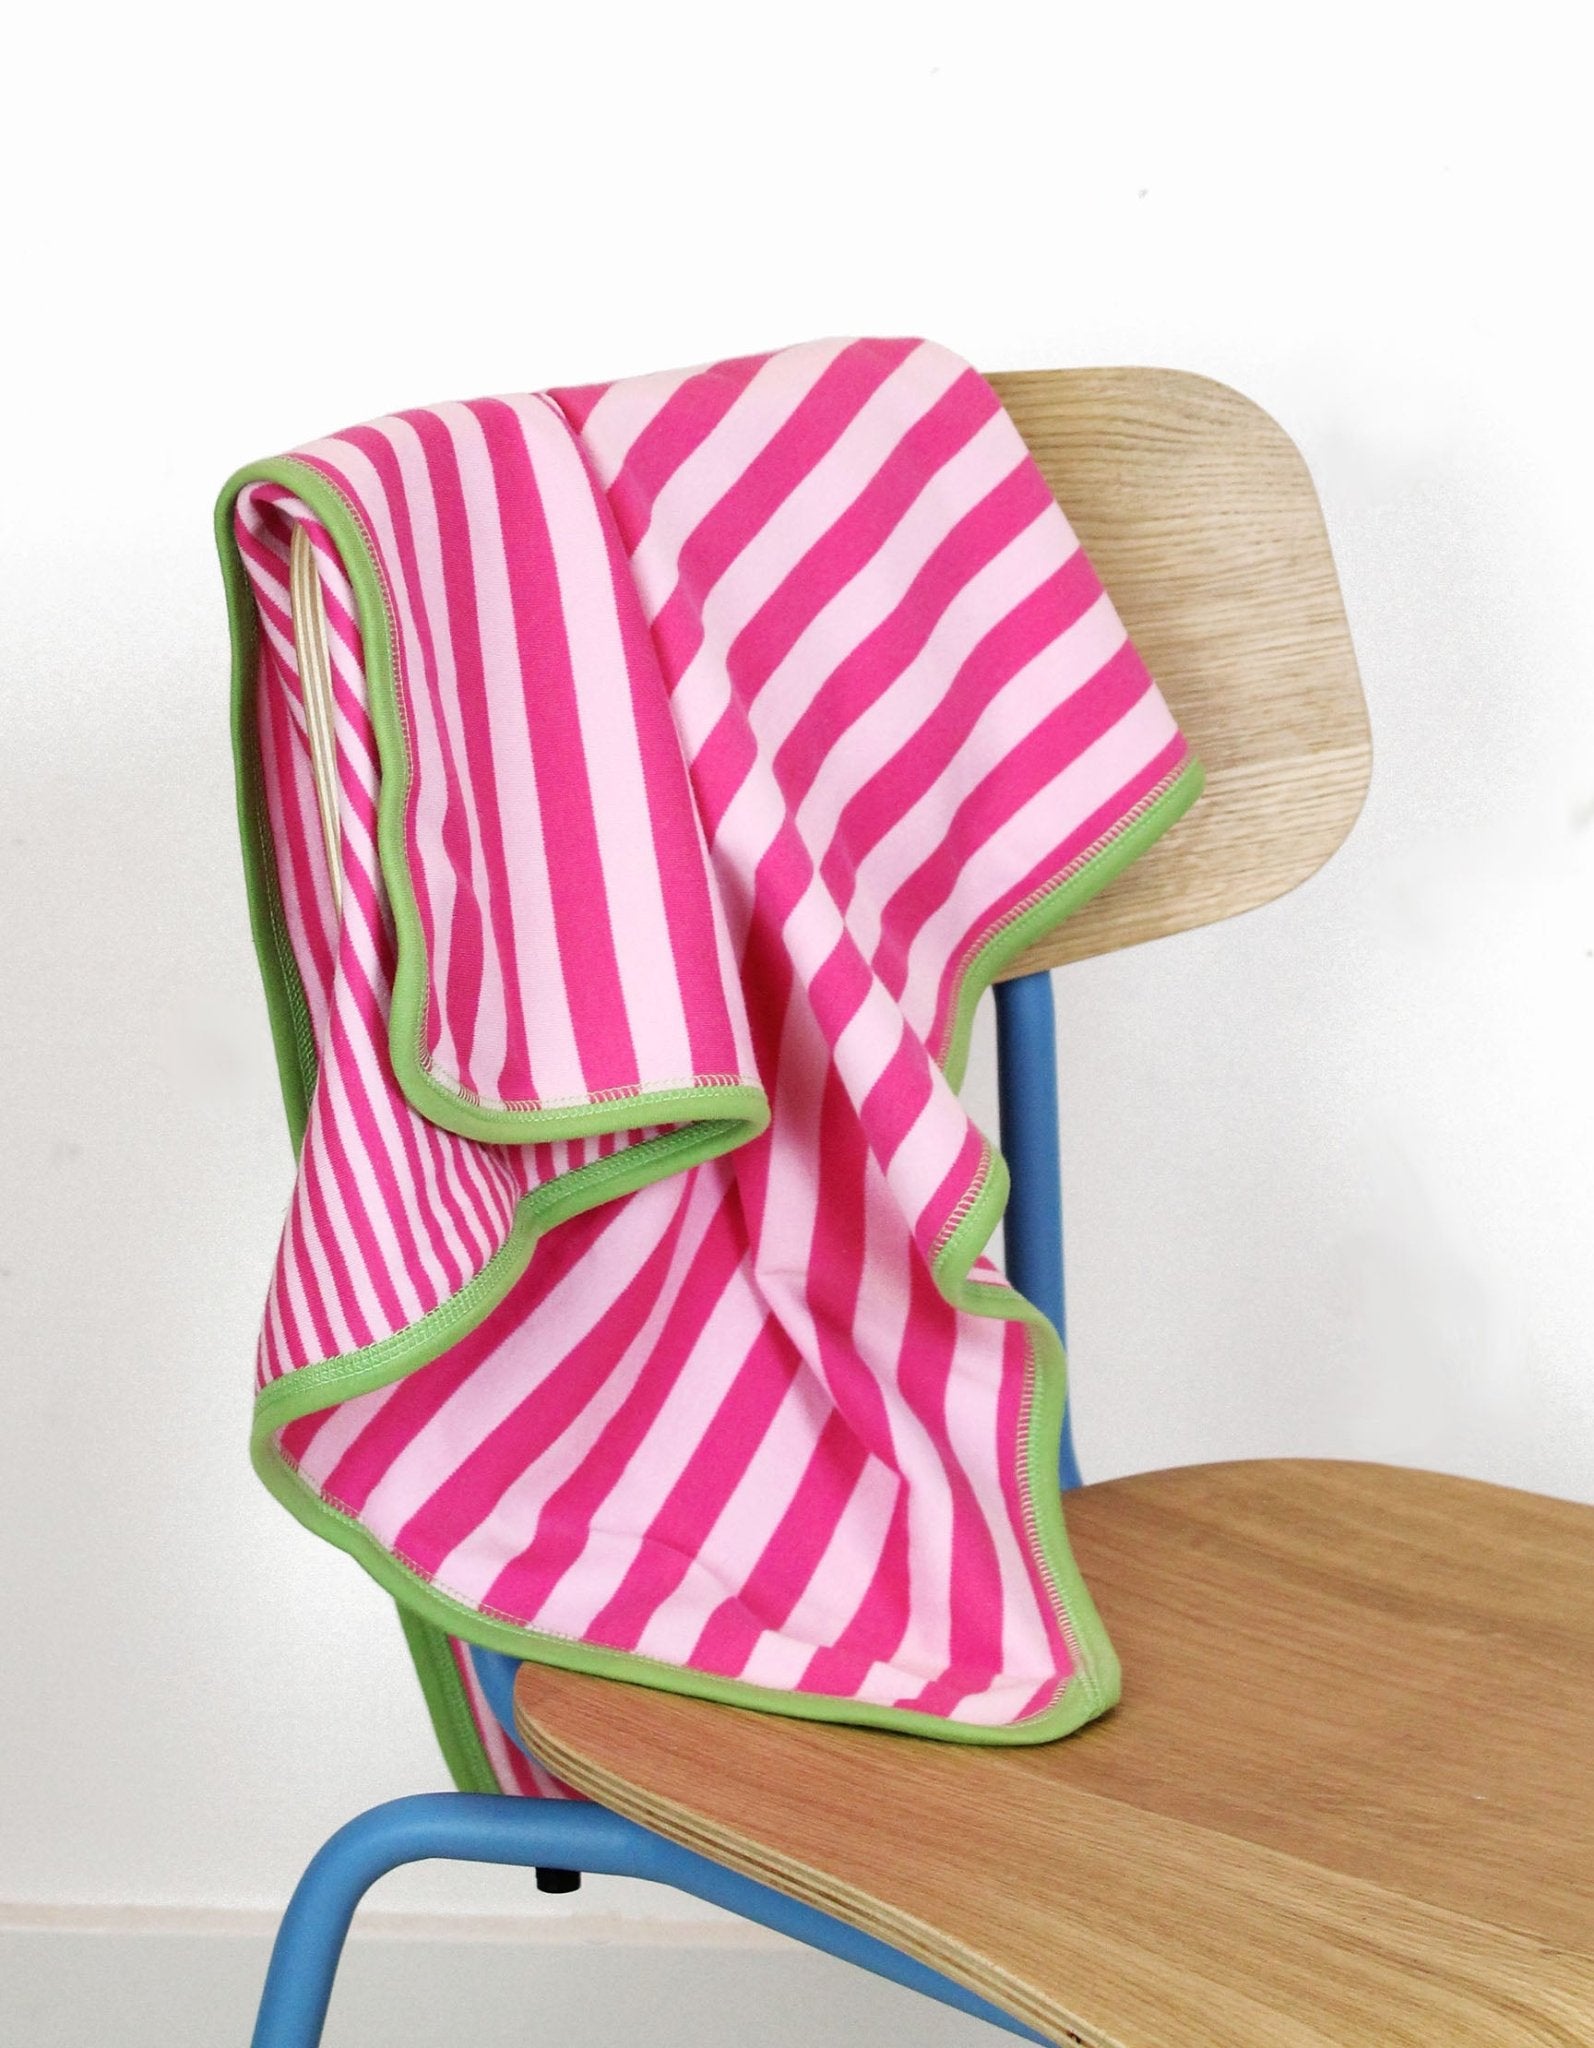 Organic Pink and Green Stripe Blanket - Toby Tiger